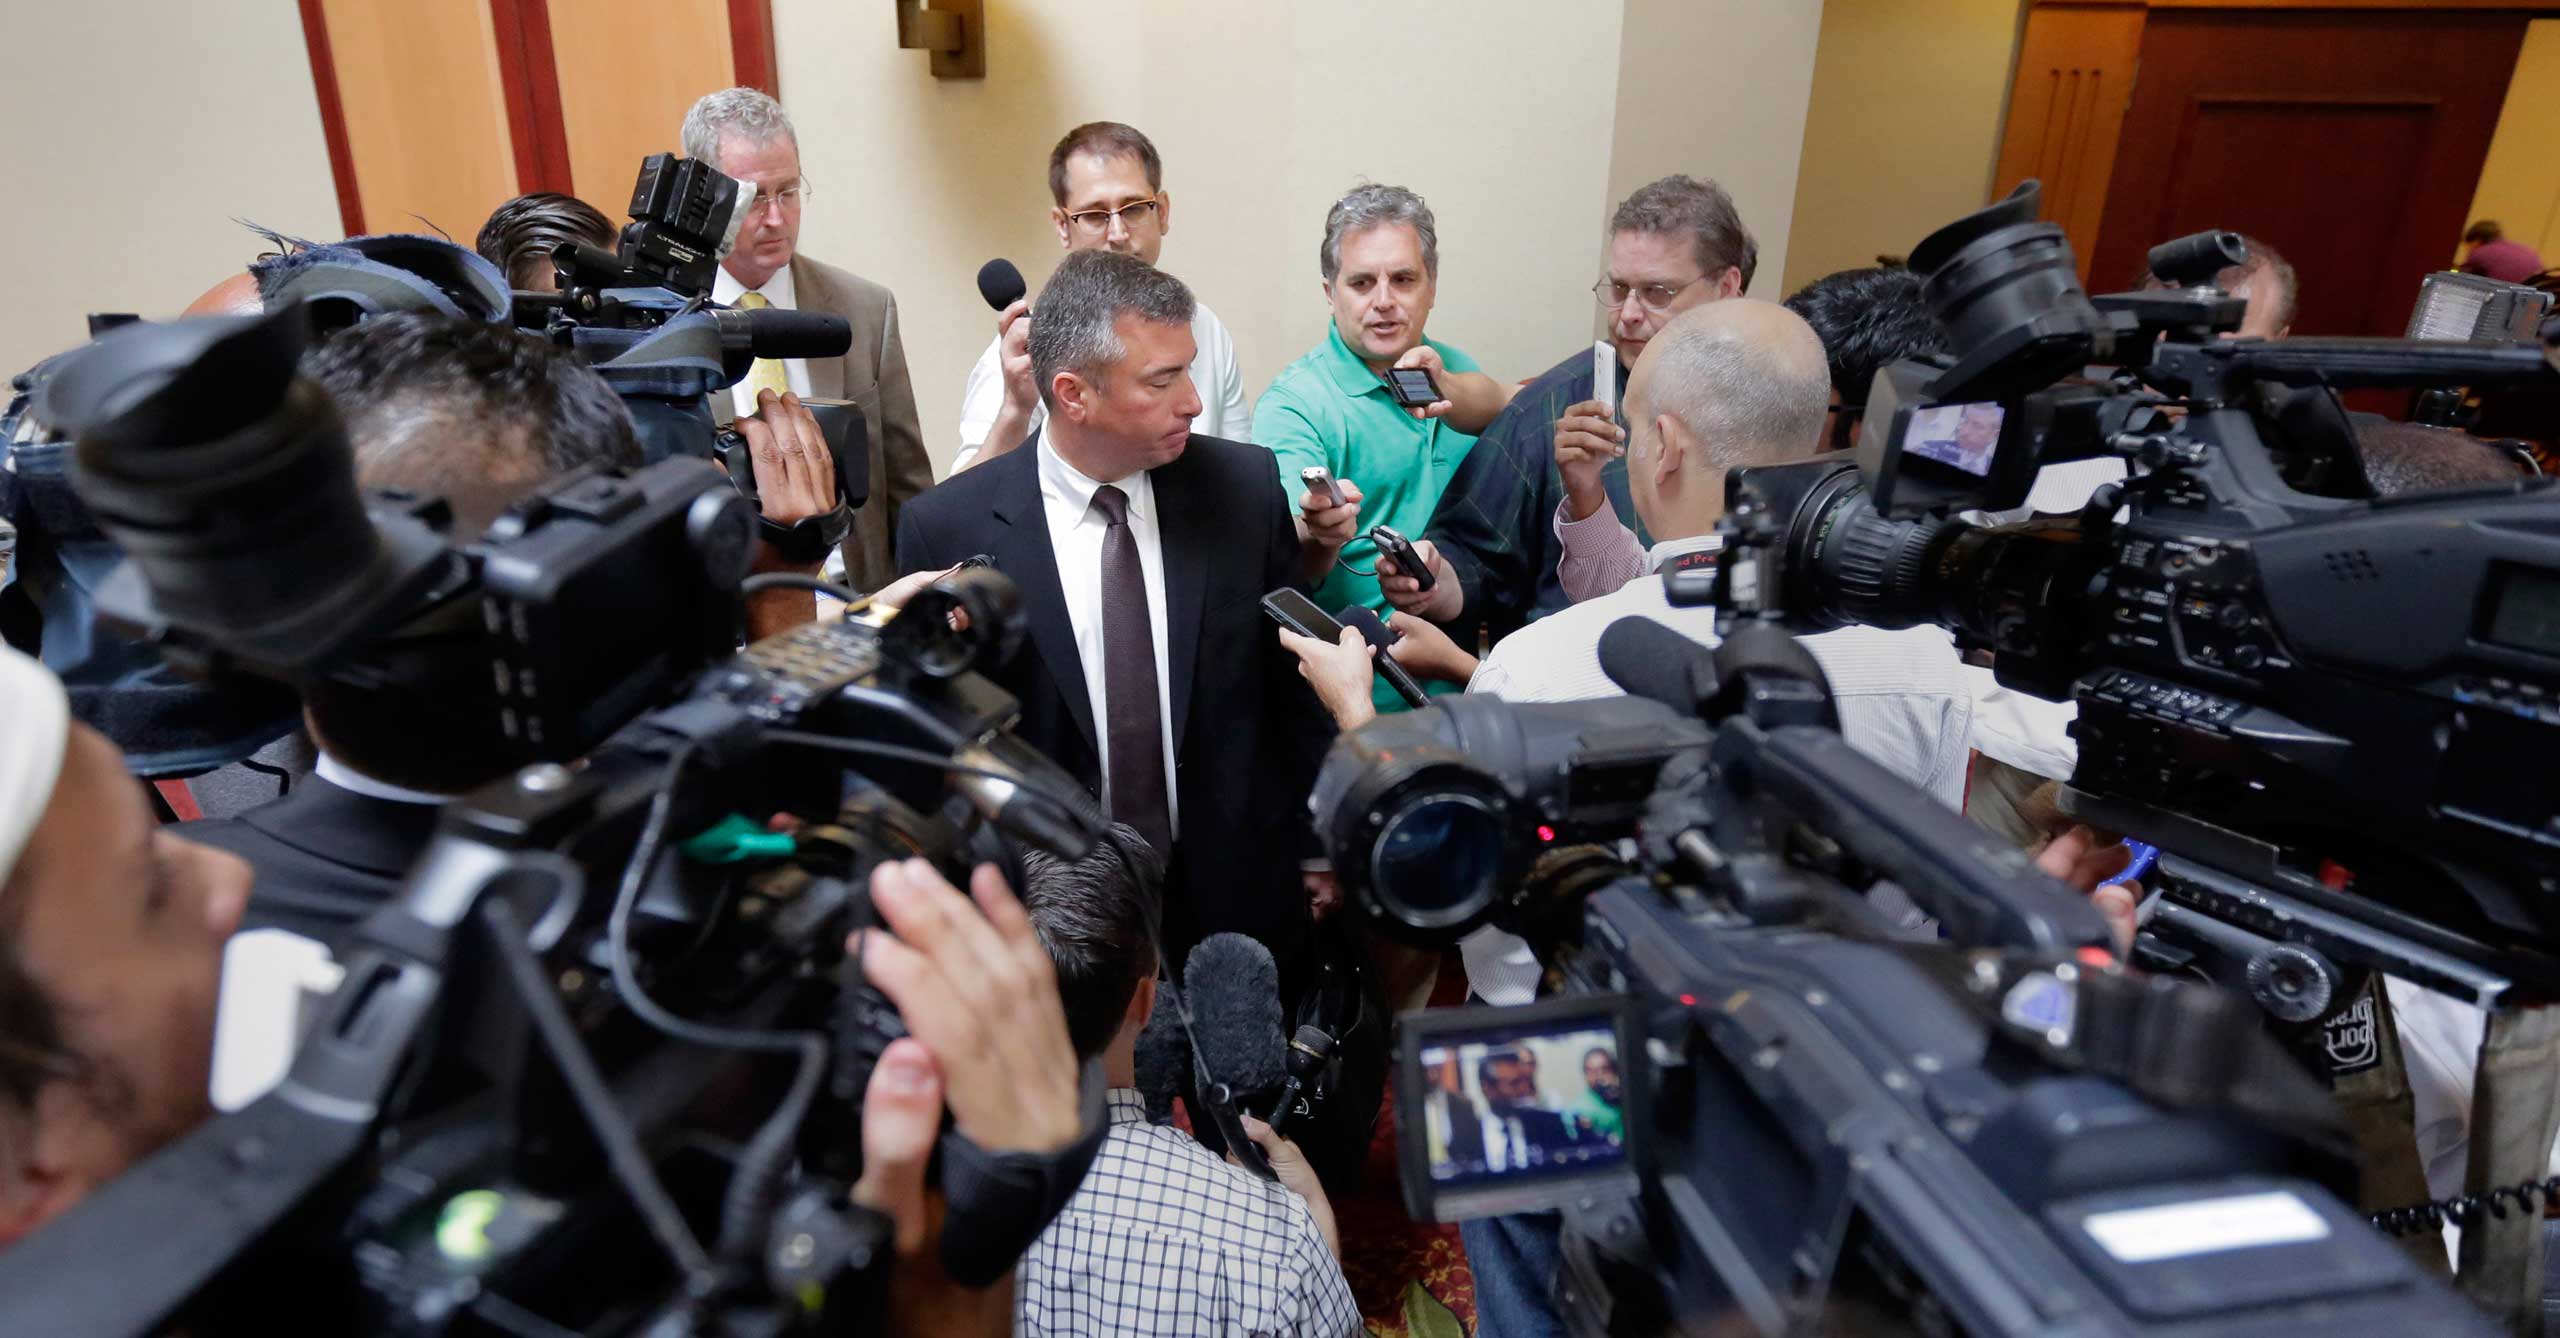 Northside Independent School District superintendent Brian Woods, center, talks to the media following an emergency meeting of the University Interscholastic League (UIL) State Executive Committee, in Round Rock, Texas, Sept. 9, 2015 (Eric Gay&mdash;AP)